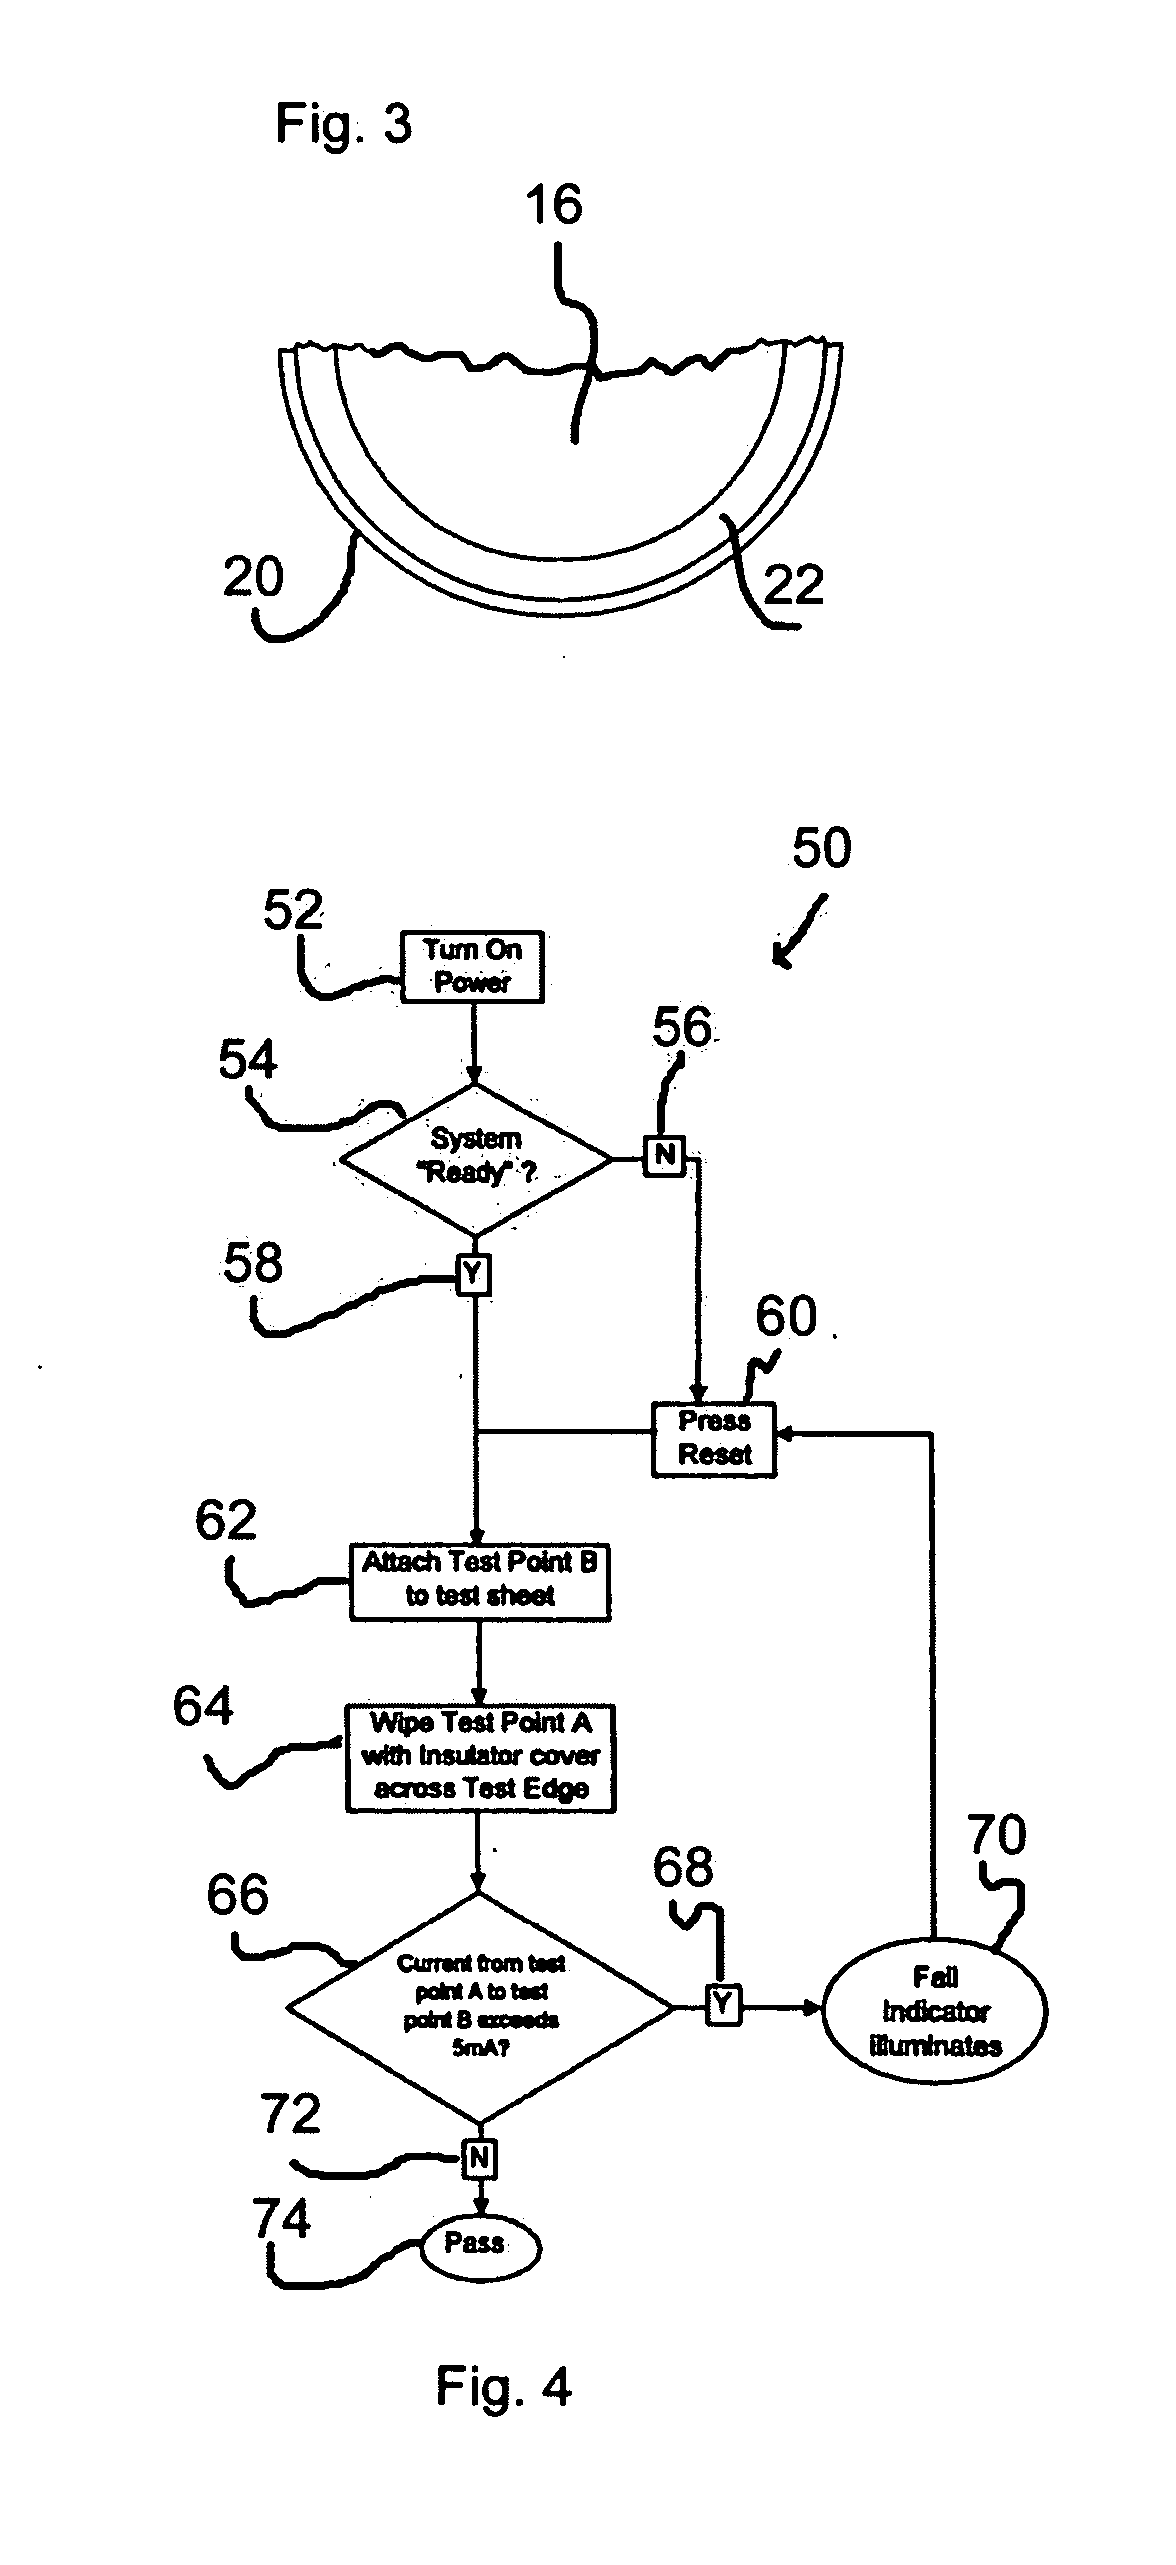 Apparatus and method for testing an edge of a workpiece for sharpness